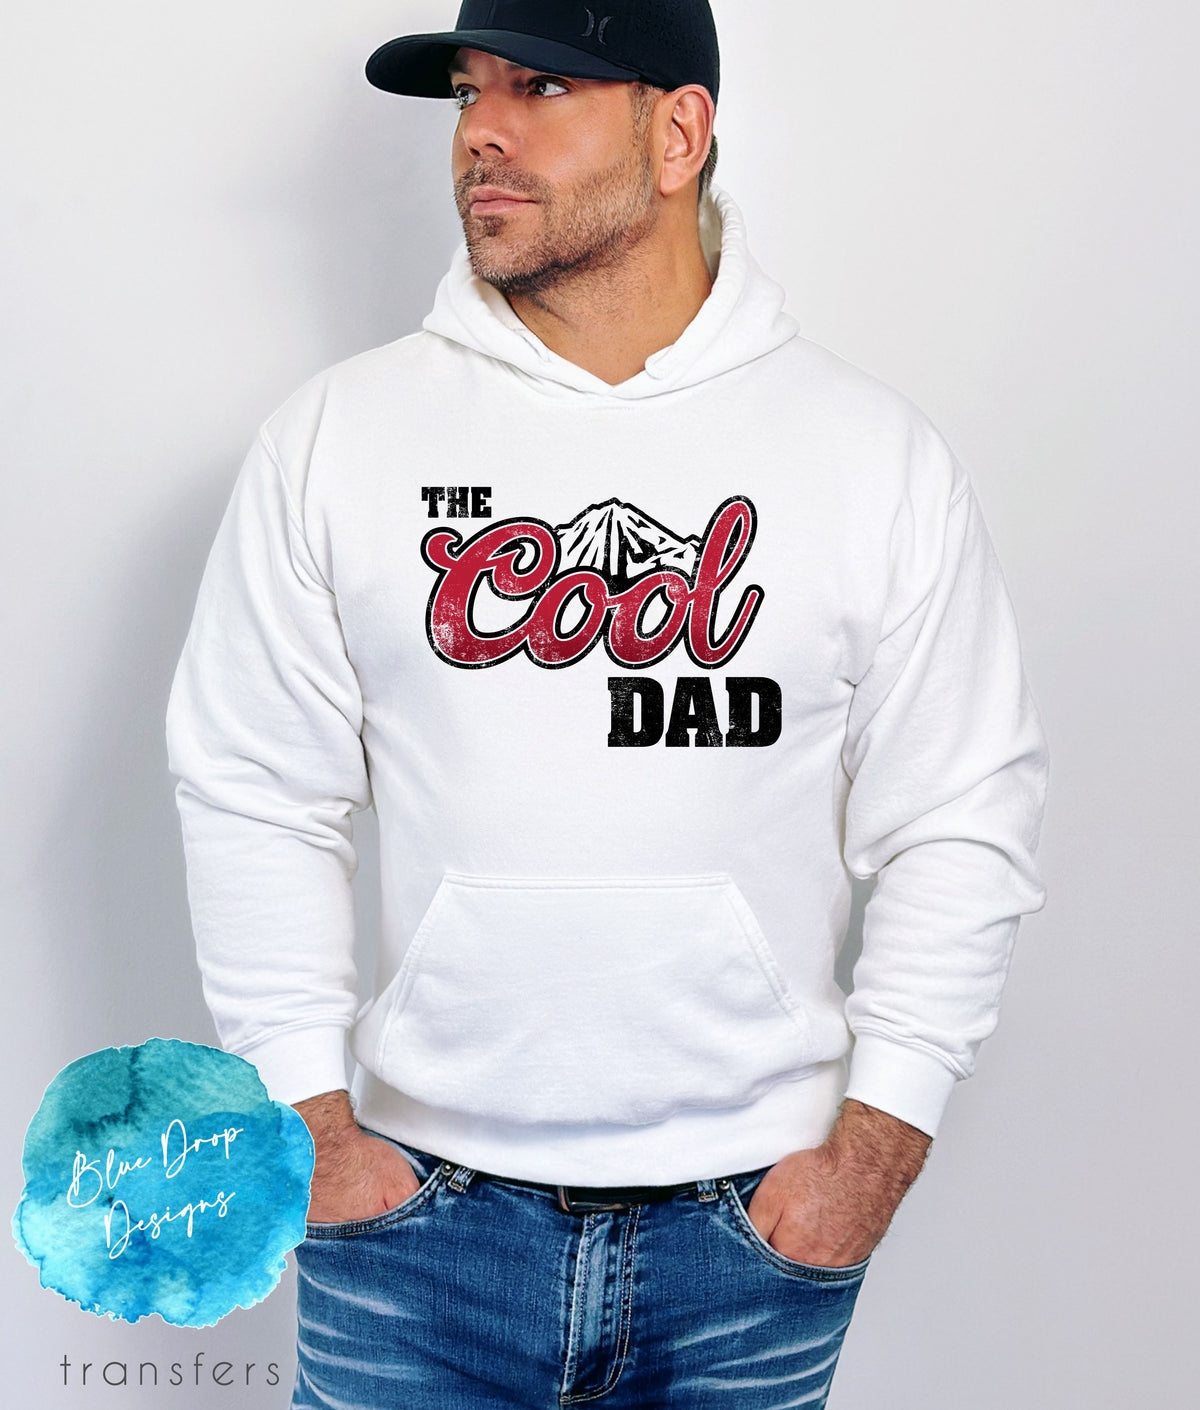 The Cool Dad Full Colour Transfer Direct to Film Colour Transfer Blue Drop Designs 